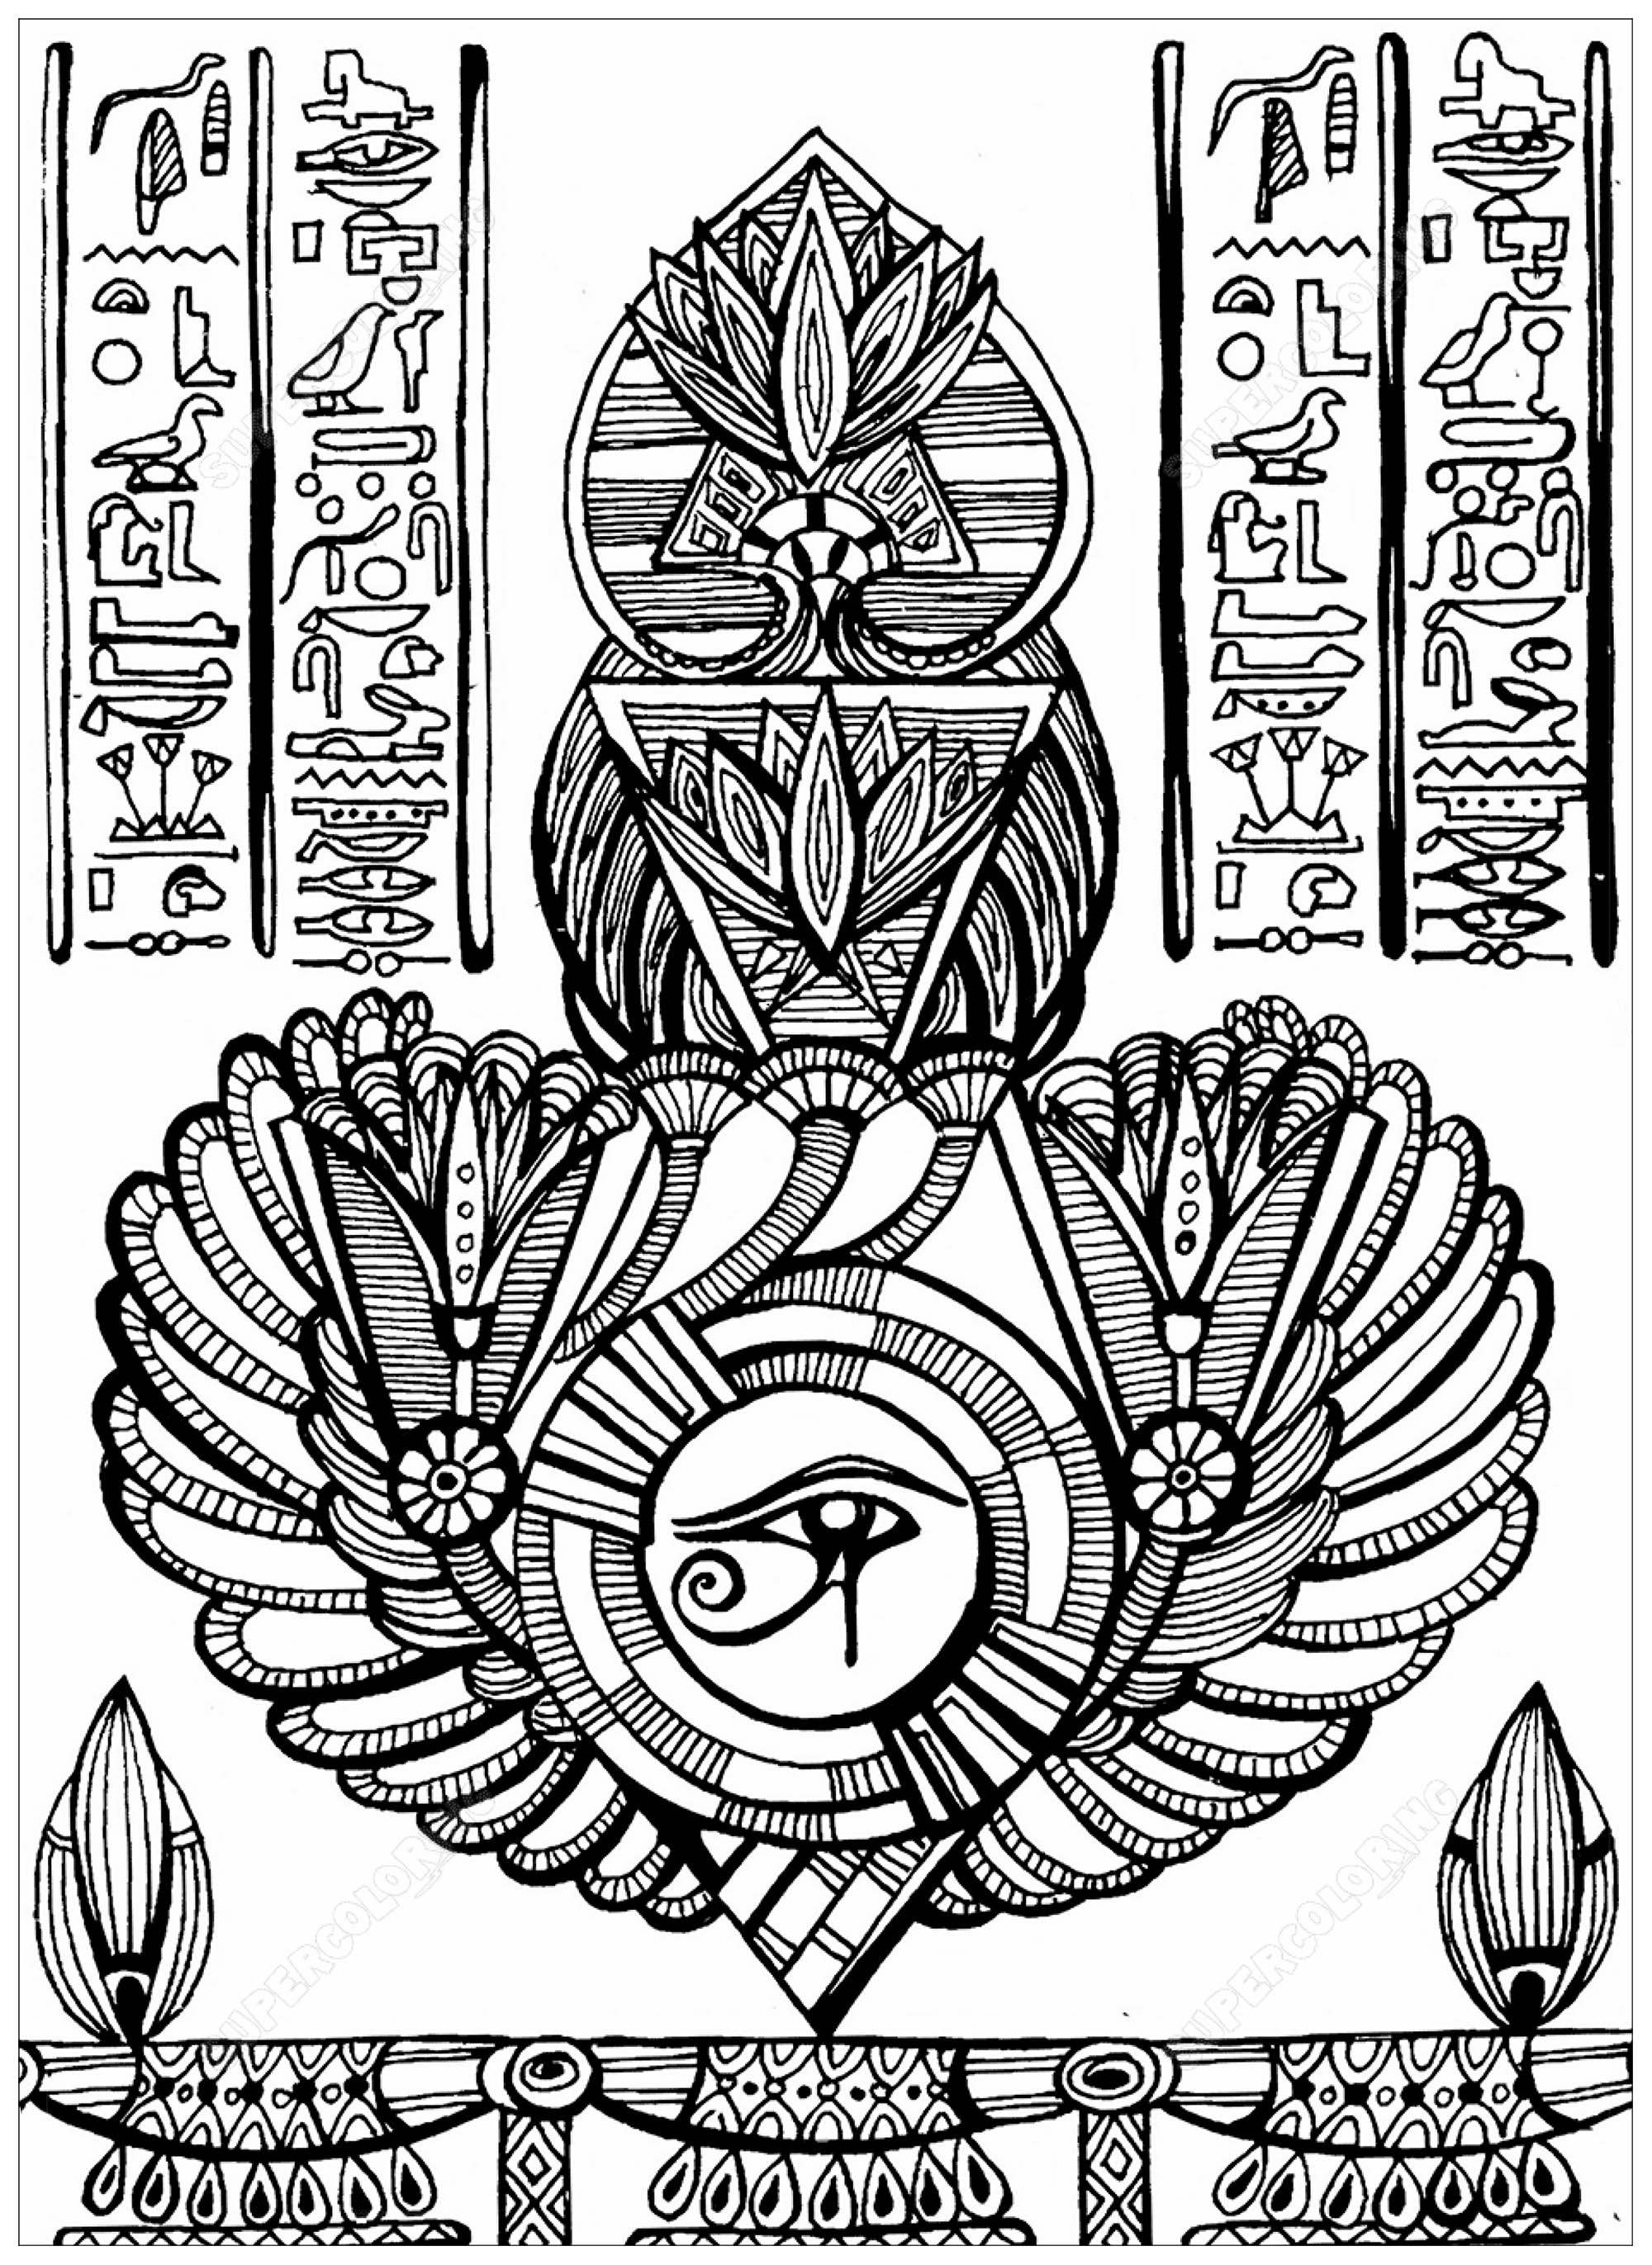 Eye of Horus (ancient Egyptian symbol of protection, royal power and good health) and other elements